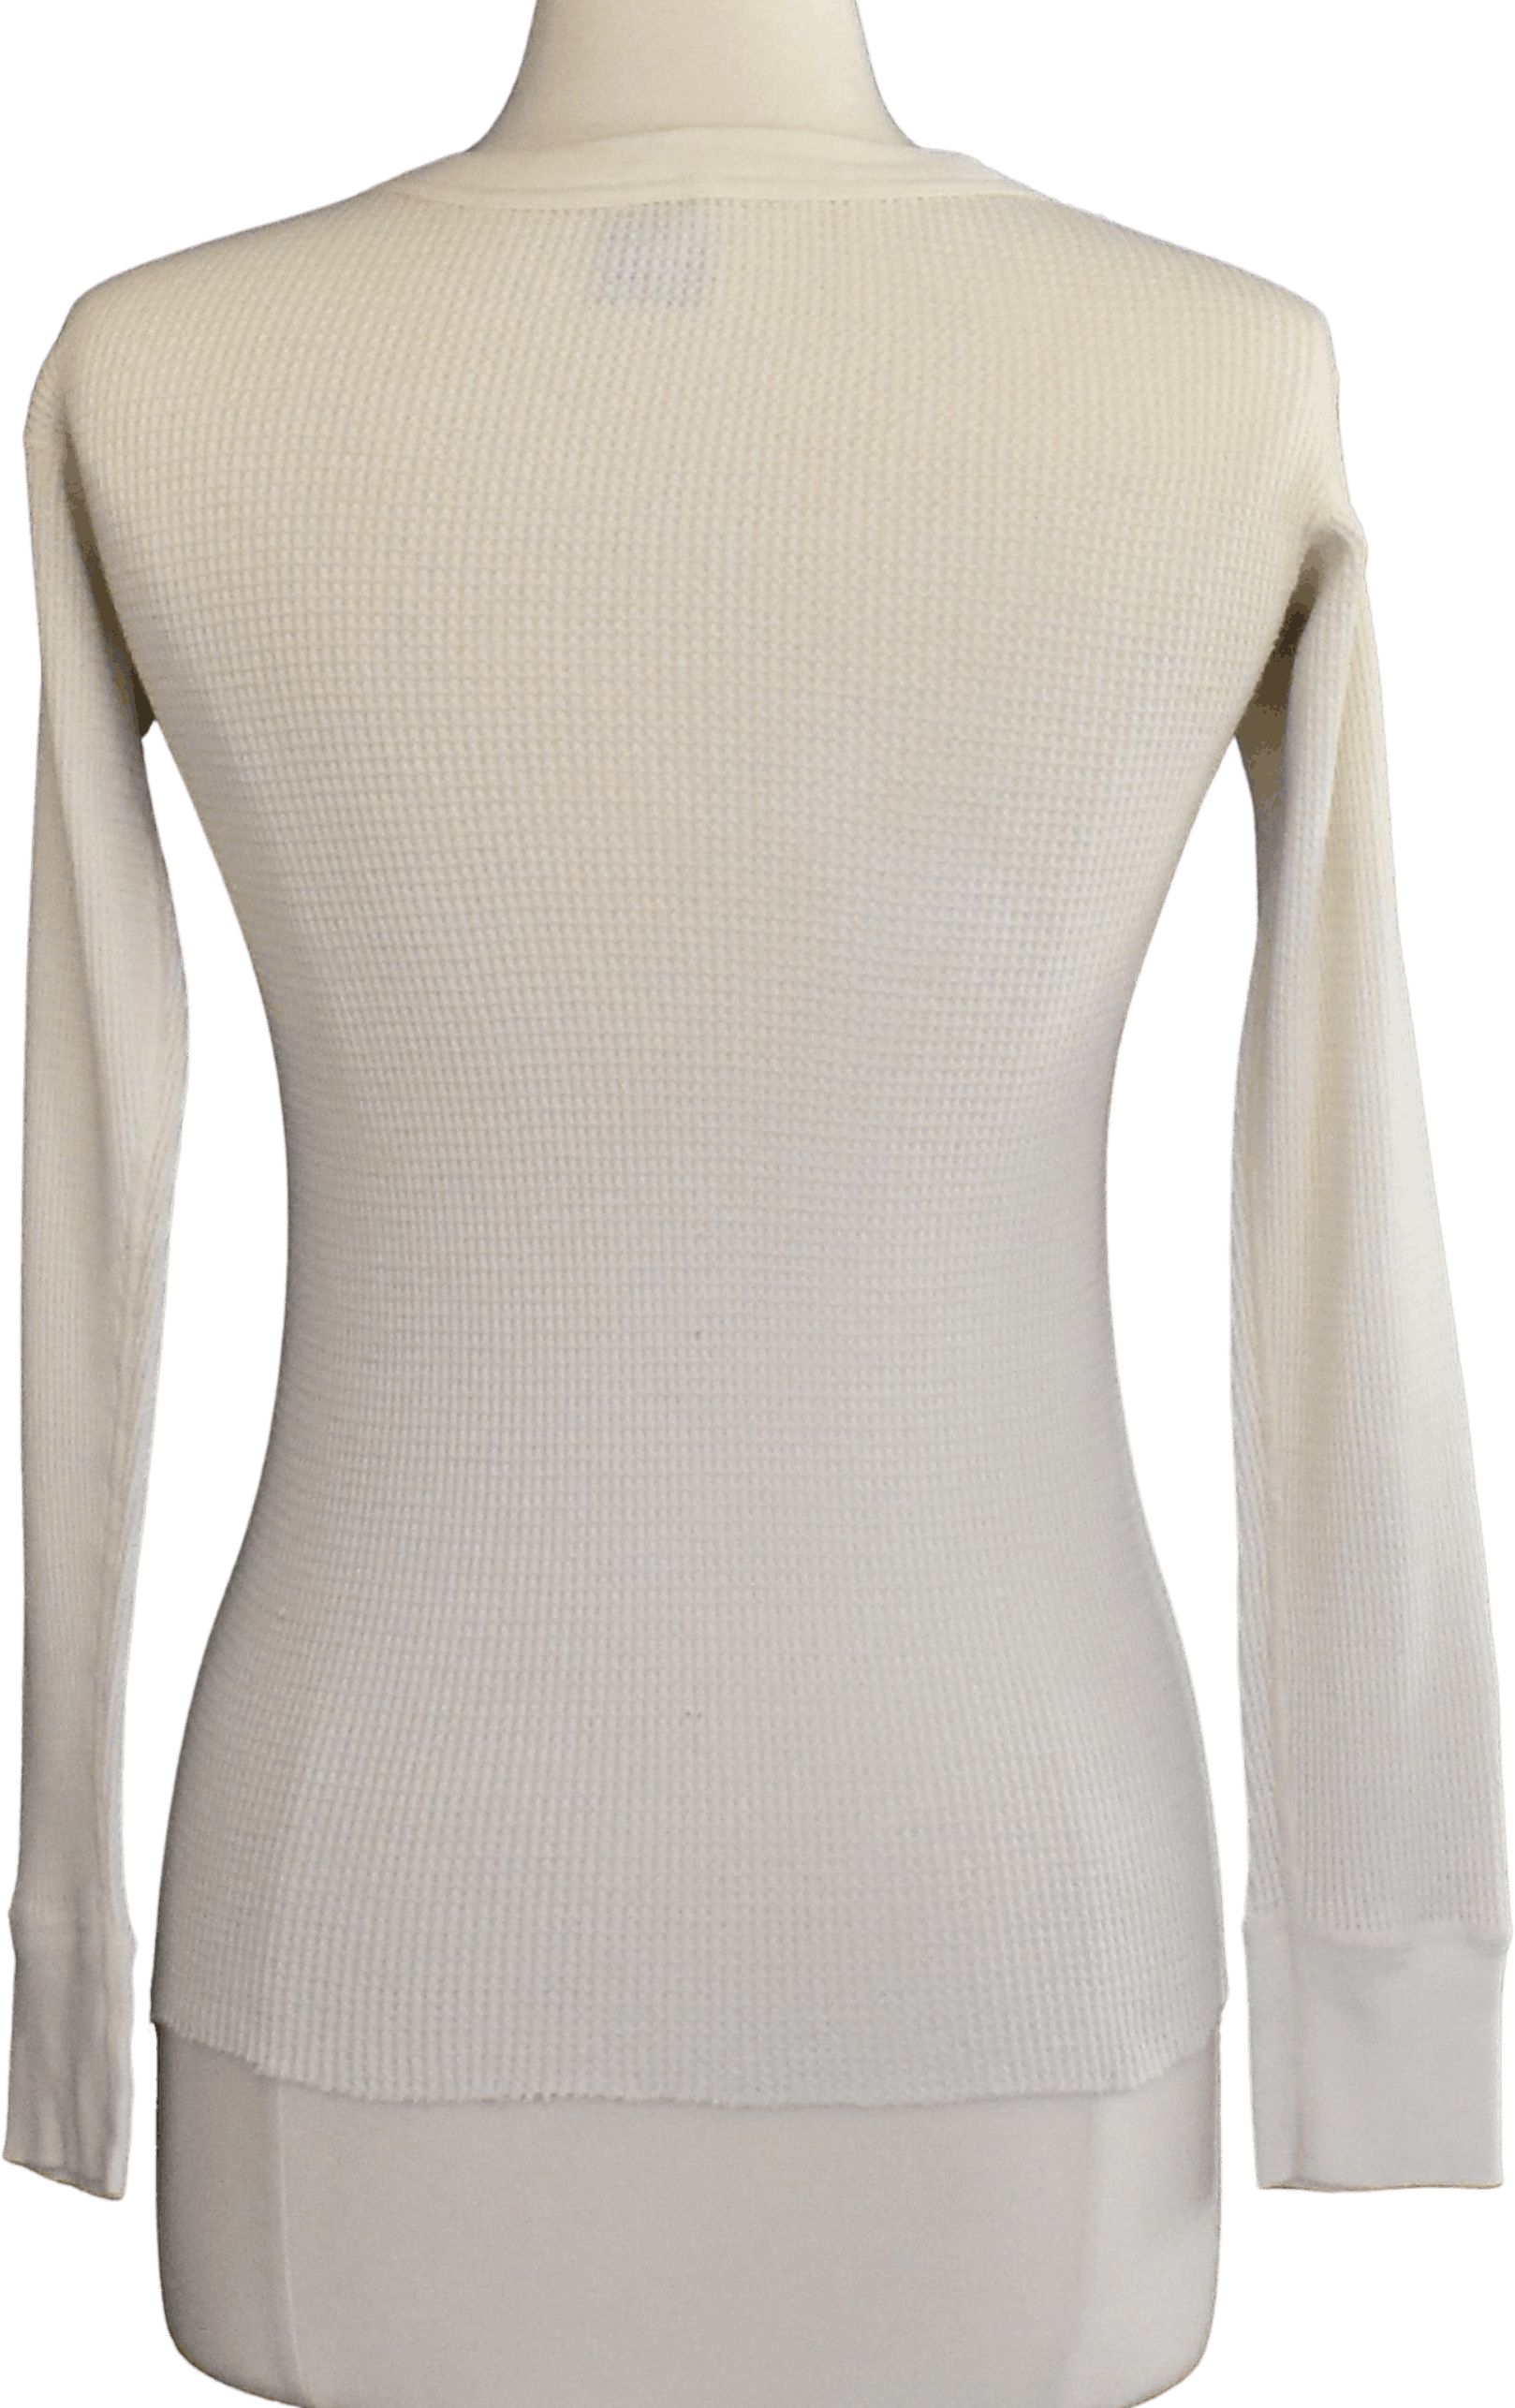 Vintage 70's Waffle Knit Thermal Shirt | Shop THRILLING